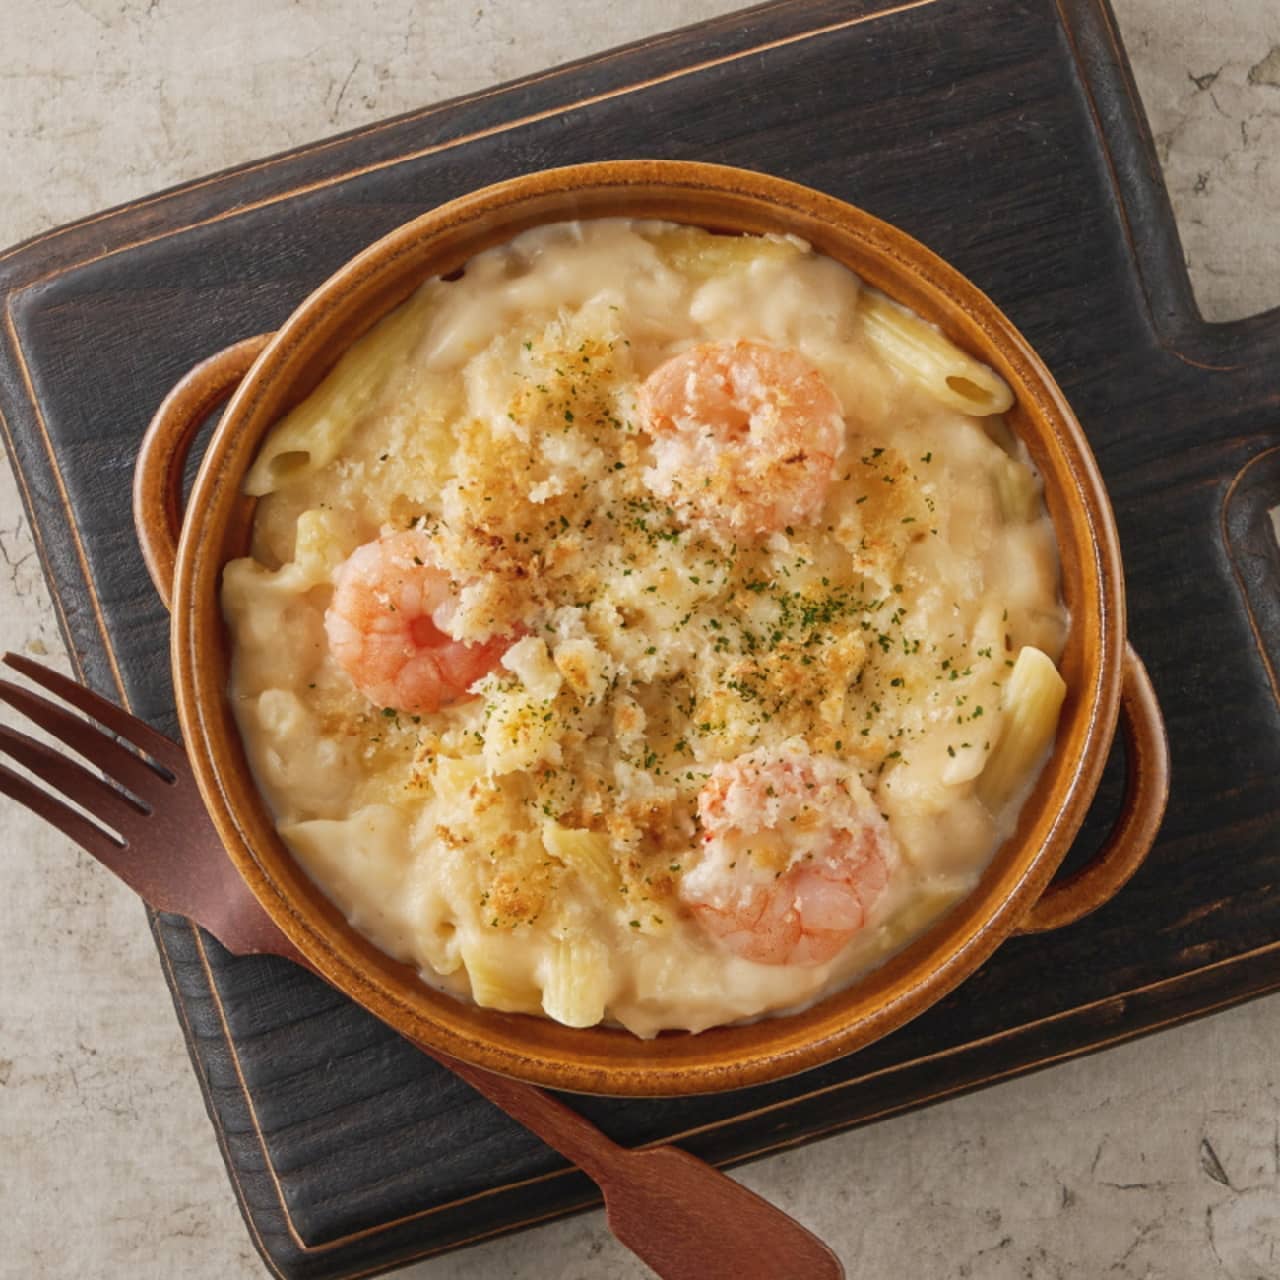 Denny's "Shrimp au gratin with three kinds of cheese from Hokkaido" serving example